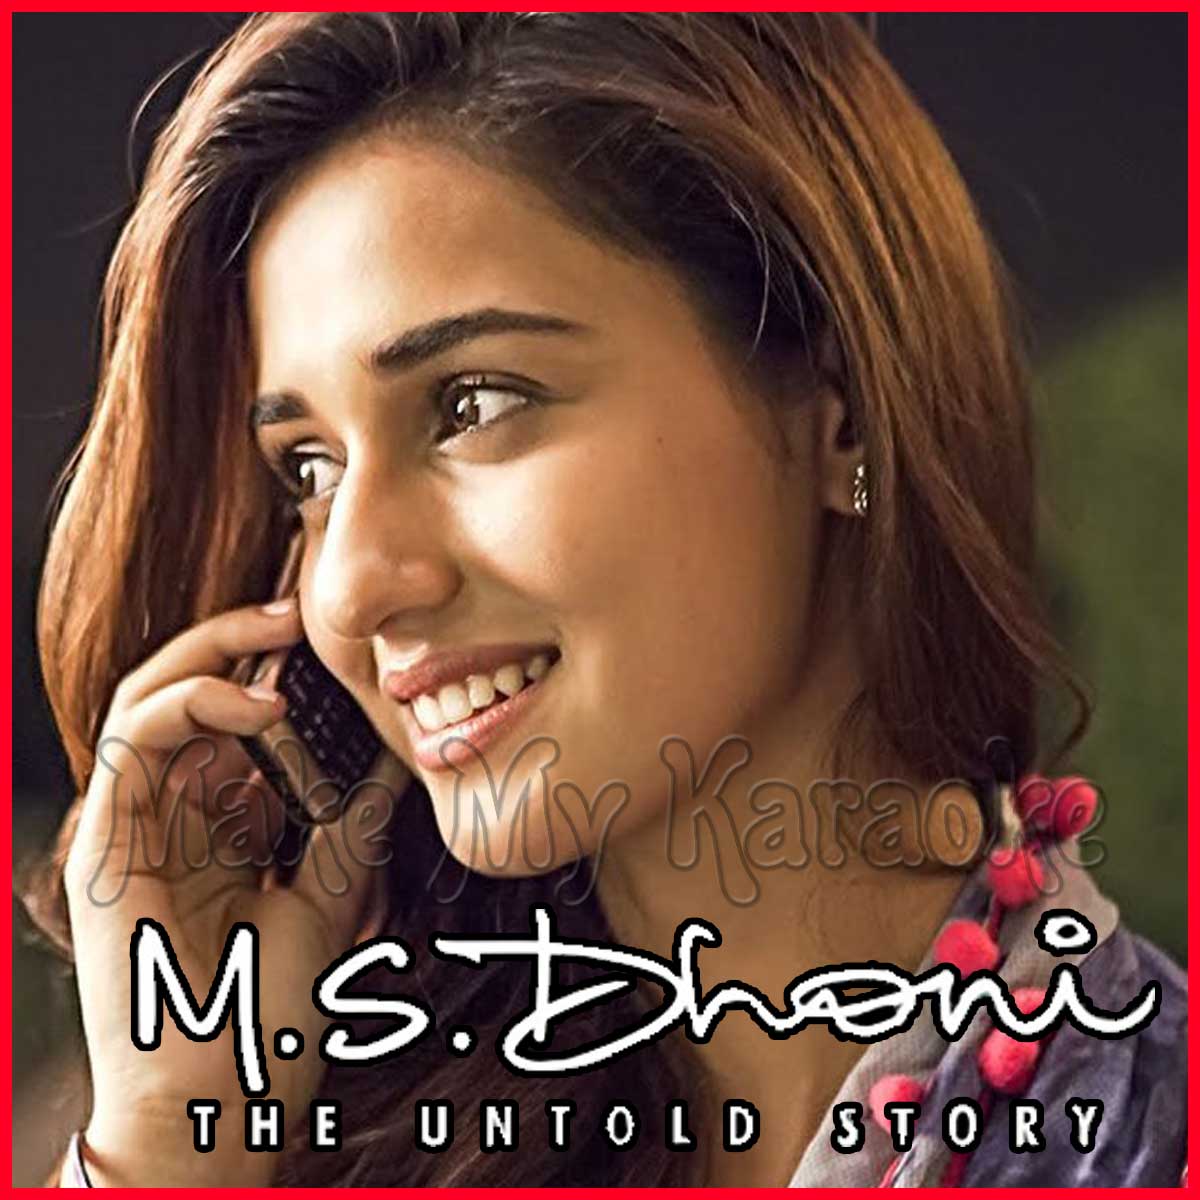 msd the untold story songs mp3 download